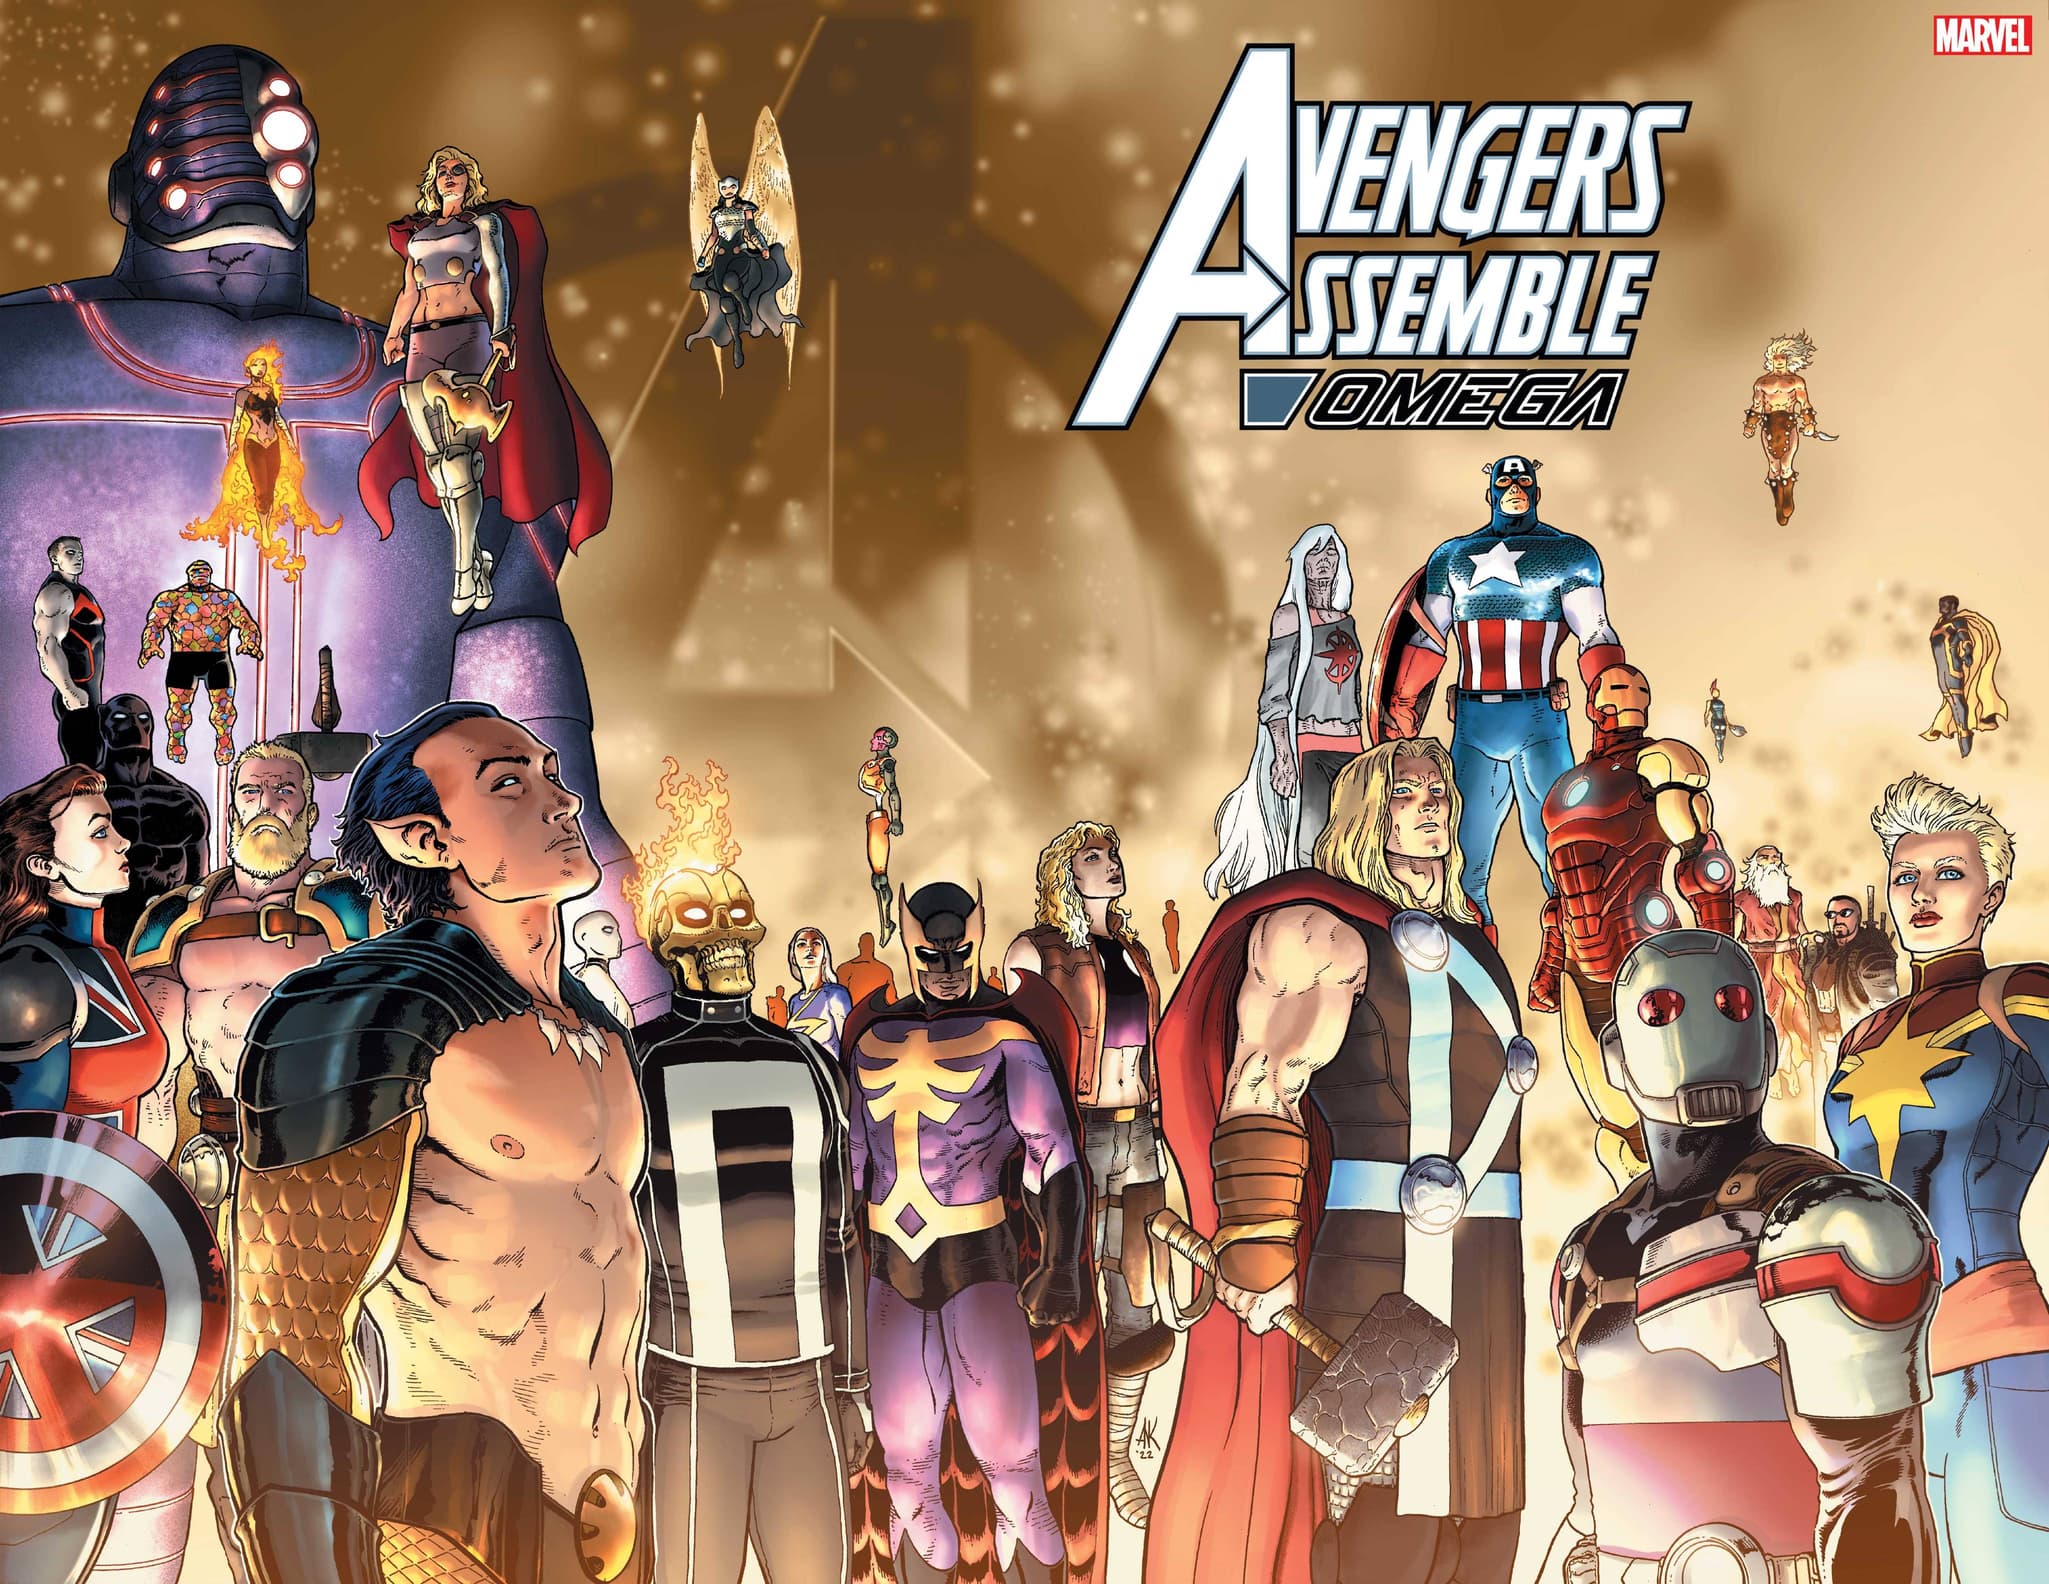 AVENGERS ASSEMBLE OMEGA #1 cover by Aaron Kuder